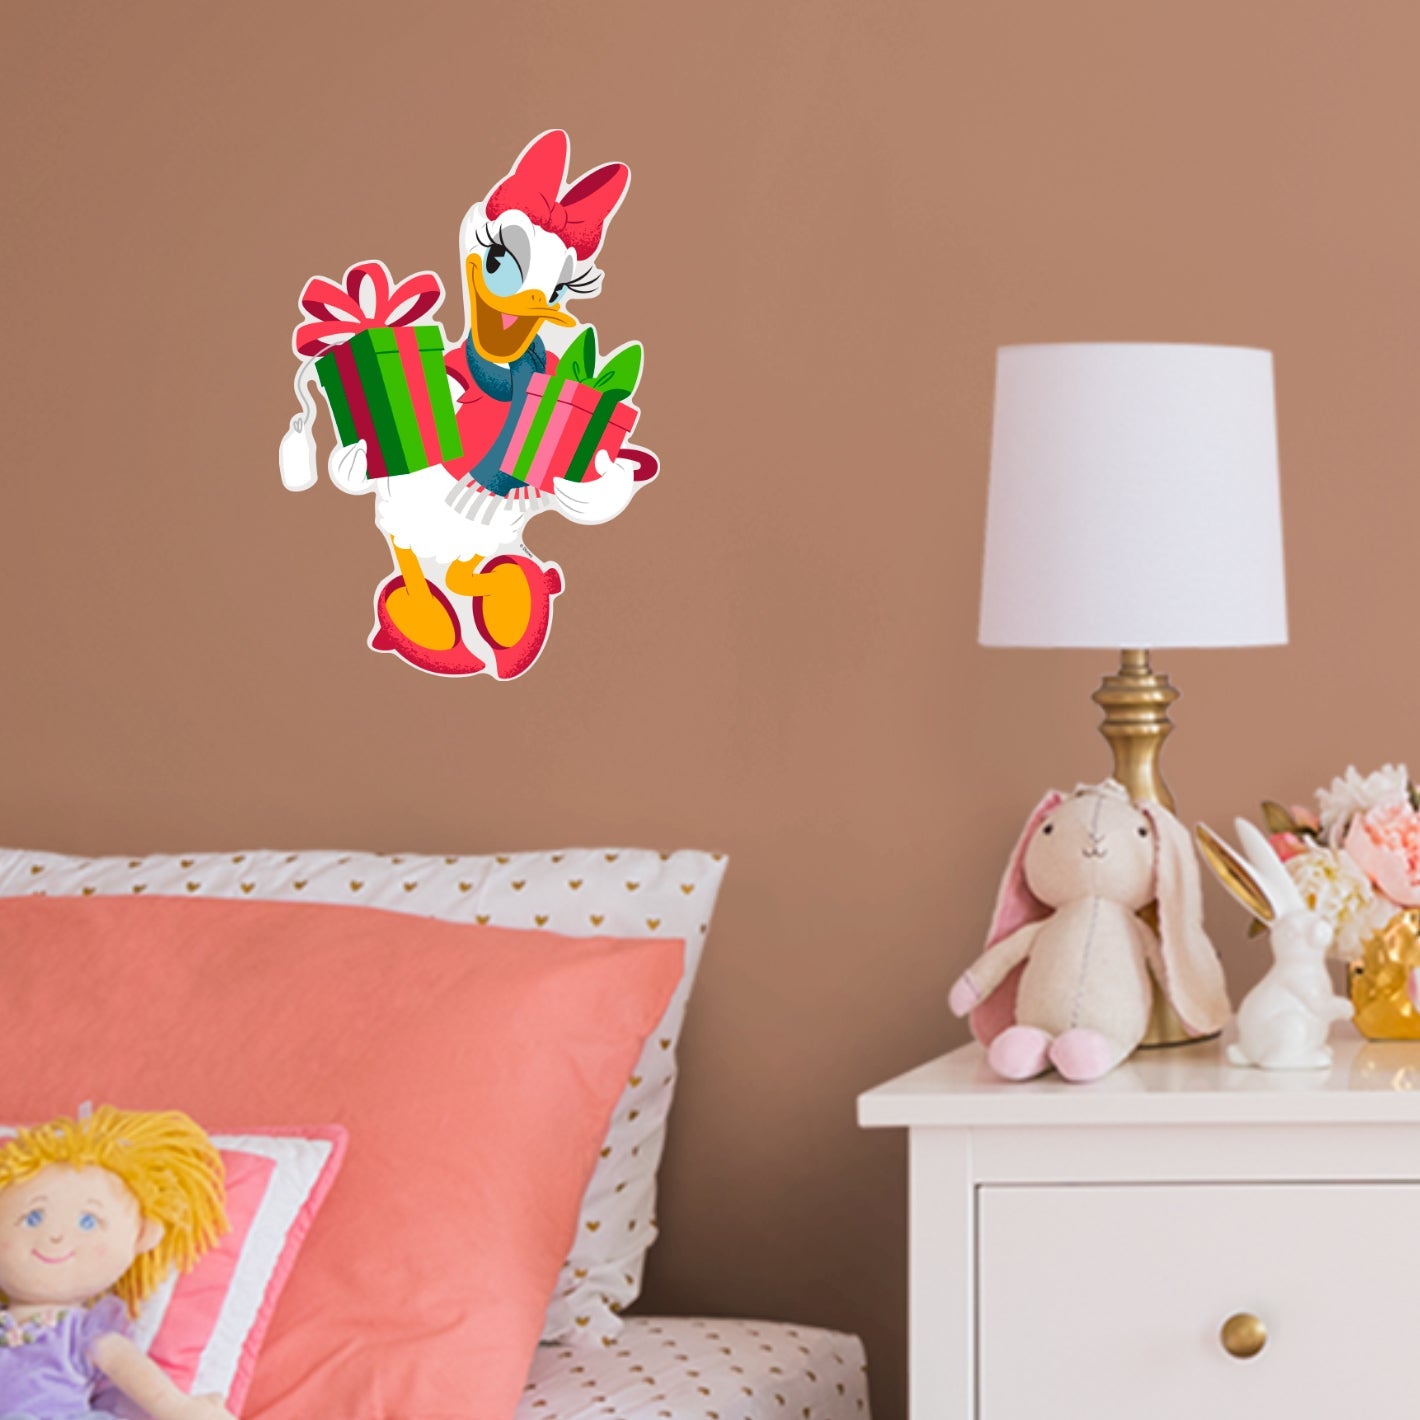 Festive Cheer: Daisy Duck Holiday Real Big - Officially Licensed Disney Removable Adhesive Decal